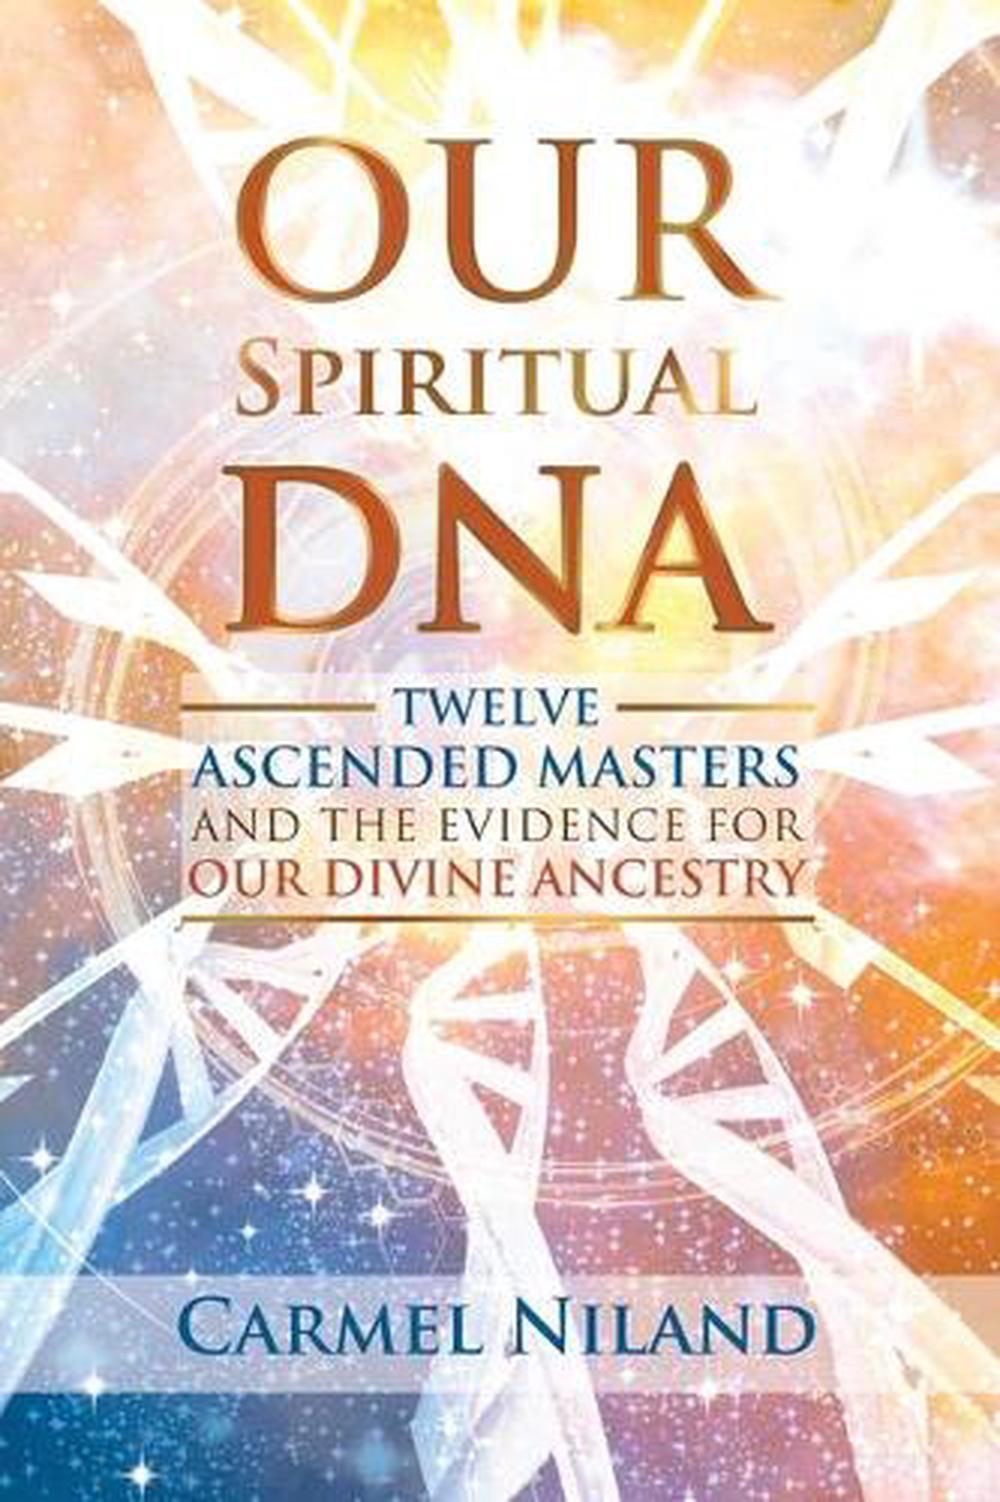 and　by　Evidence　Niland,　DNA:　Carmel　Ancestry　Divine　Our　Our　Spiritual　for　Ascended　the　Masters　Twelve　Paperback,　The　online　9781644112632　at　Buy　Nile